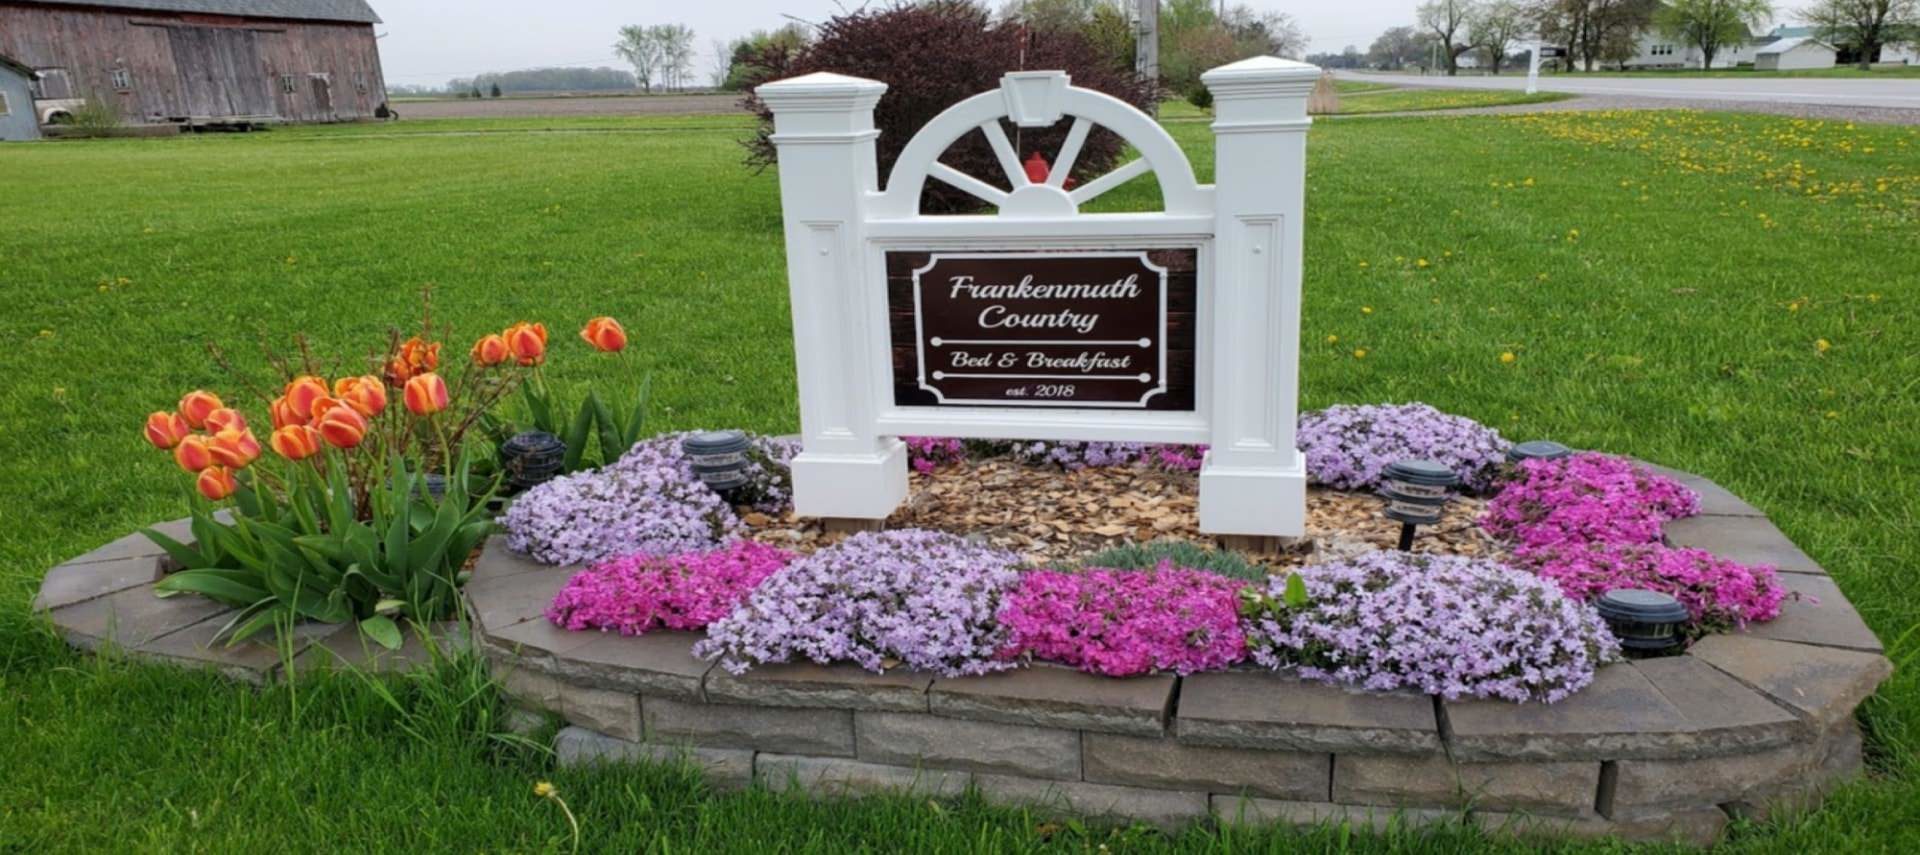 Welcome sign for the property surrounded by orange, purple, and pink flowers in raised stone garden bed surrounded by green grass